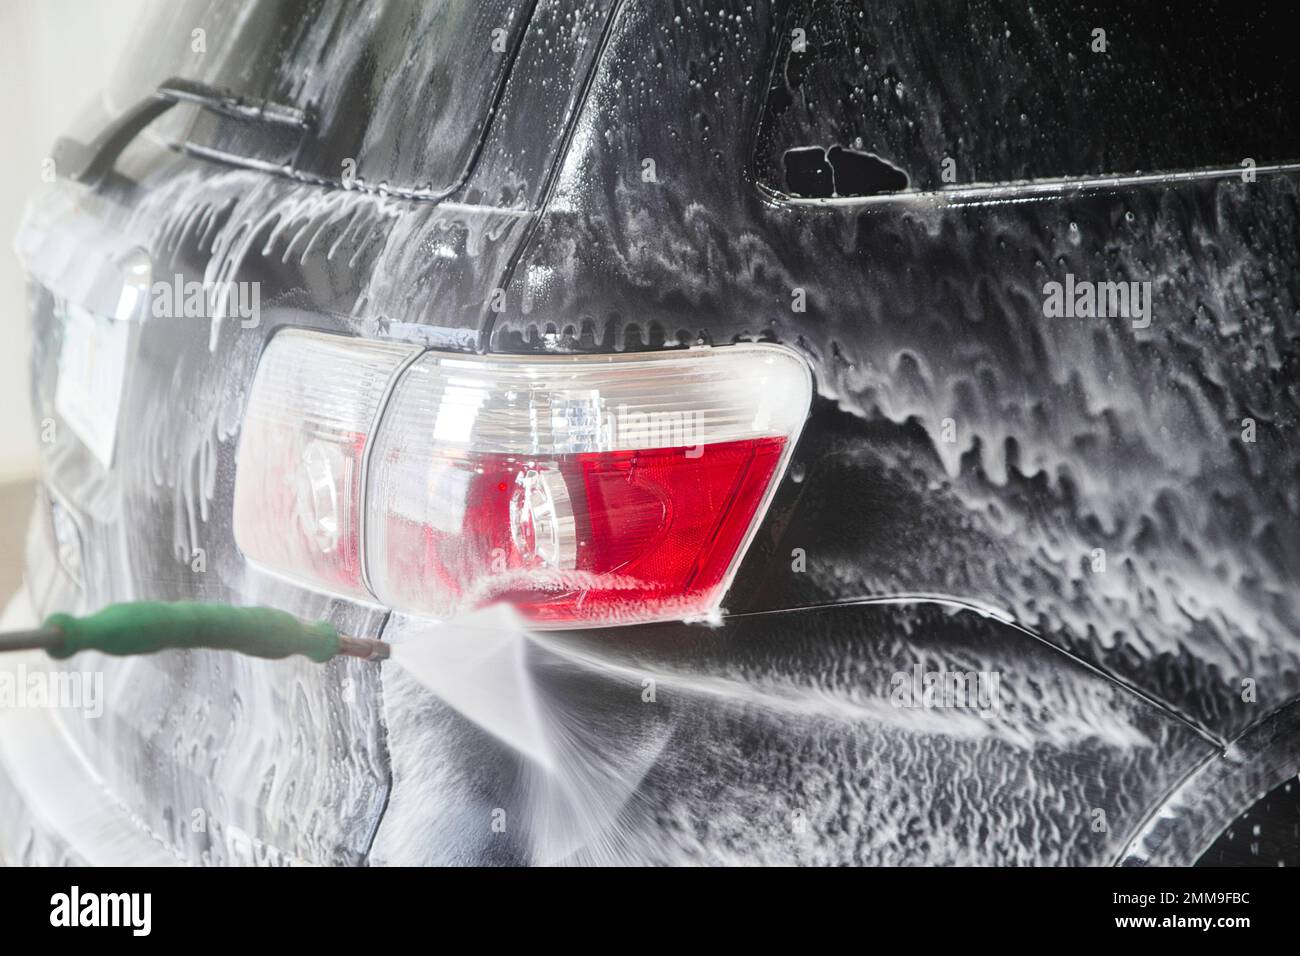 Soapy water spraying out from a wand washing the red tail light of a car Stock Photo